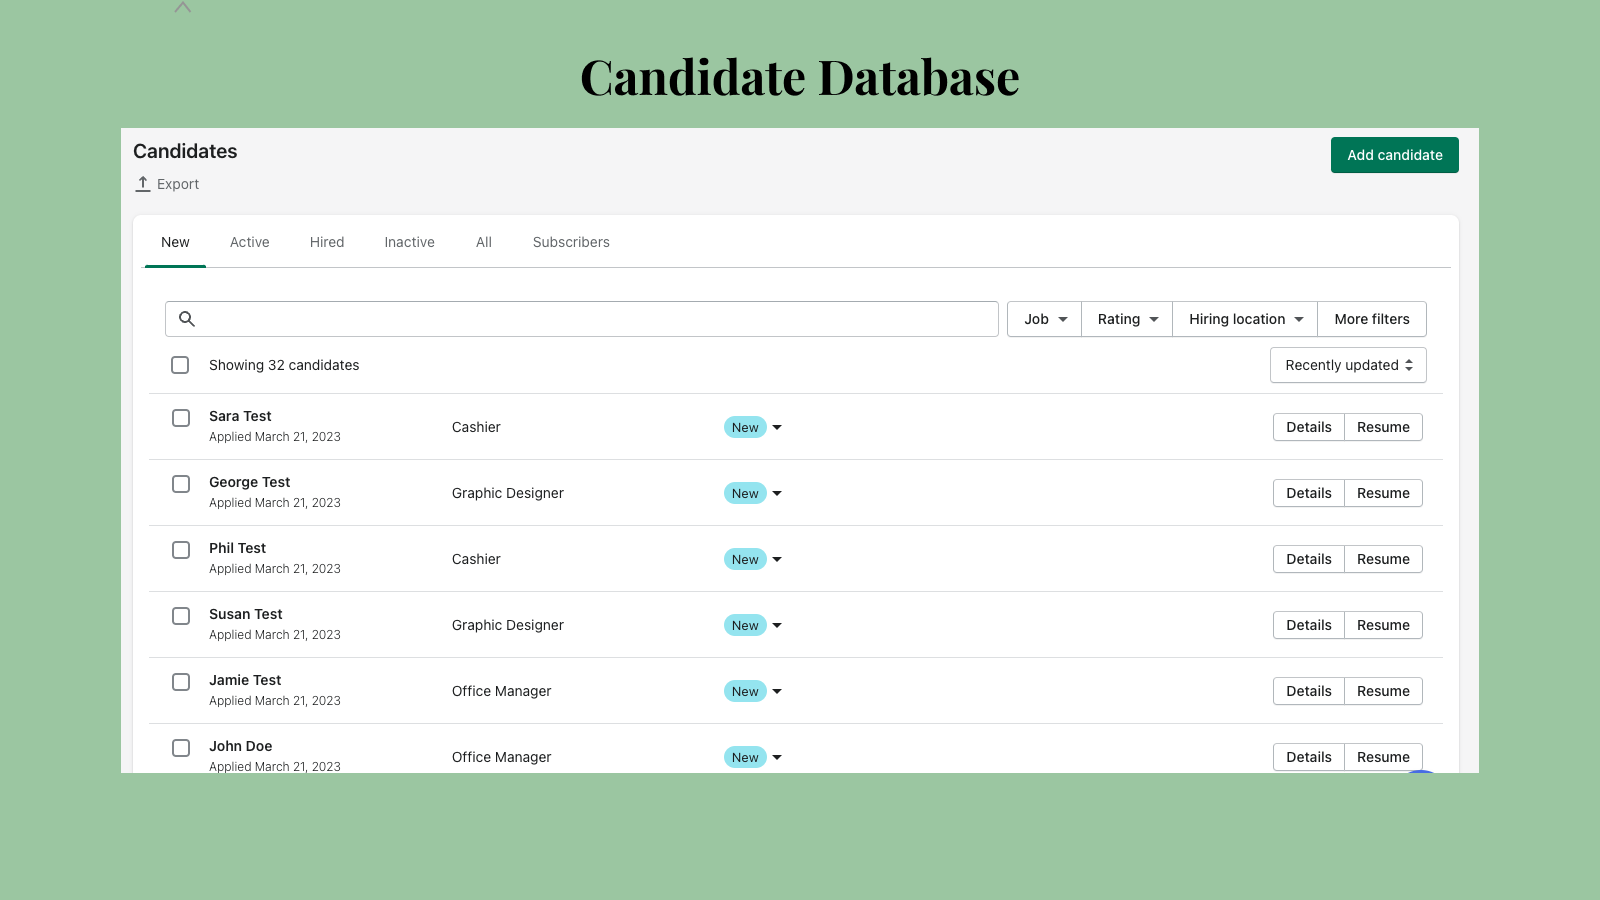 Organize your candidates